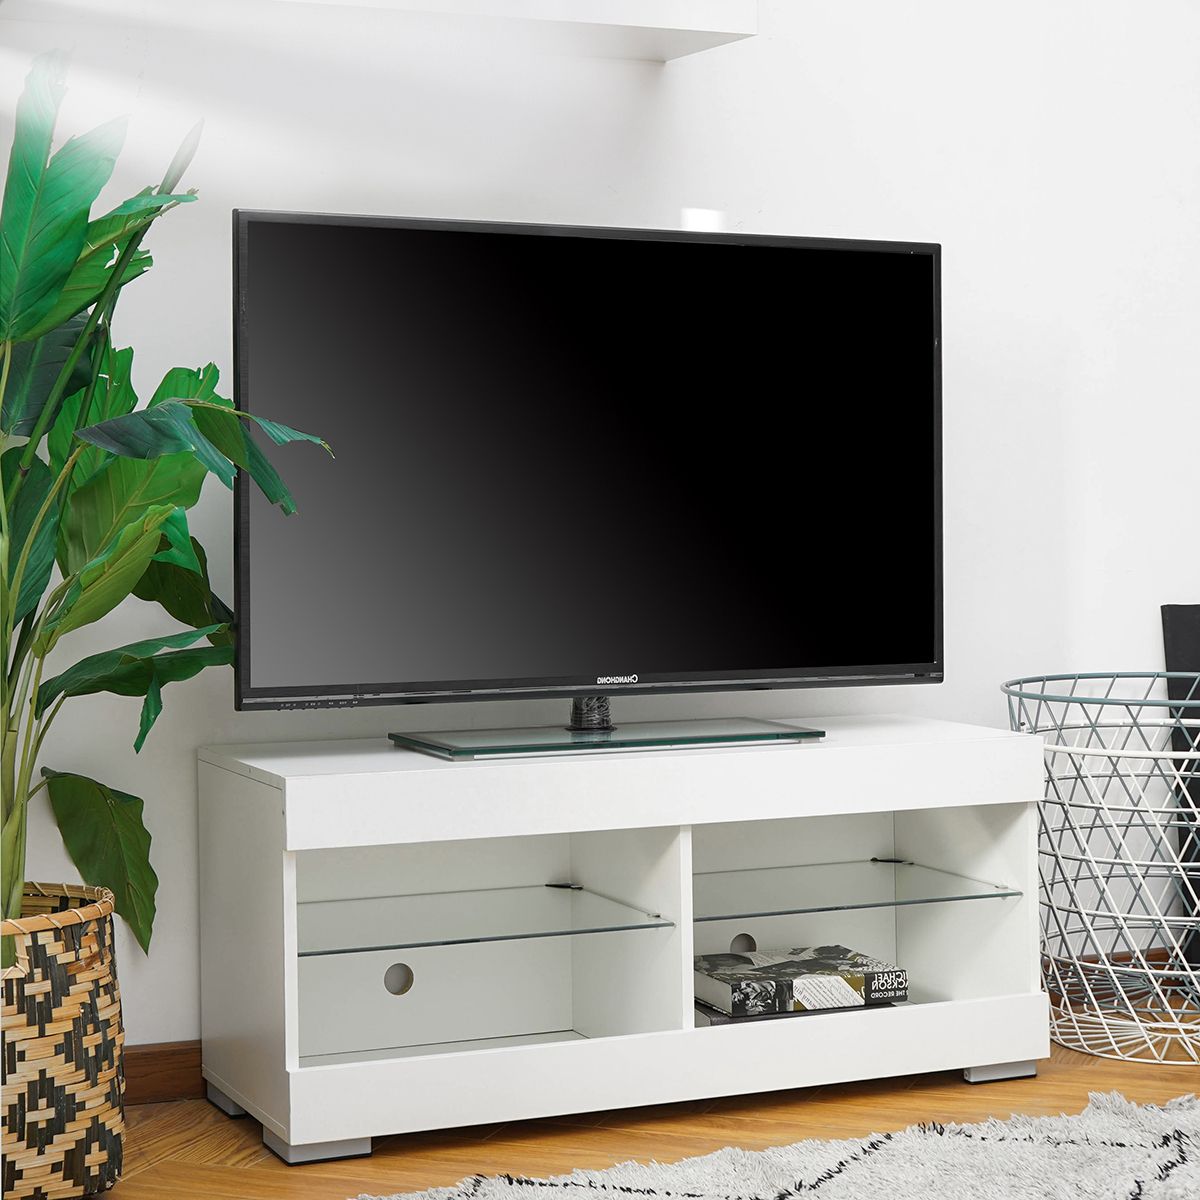 Wood Television Stand Modern Tv Stand Cabinet With Led With Regard To Trendy Glass Shelf With Tv Stands (View 5 of 10)